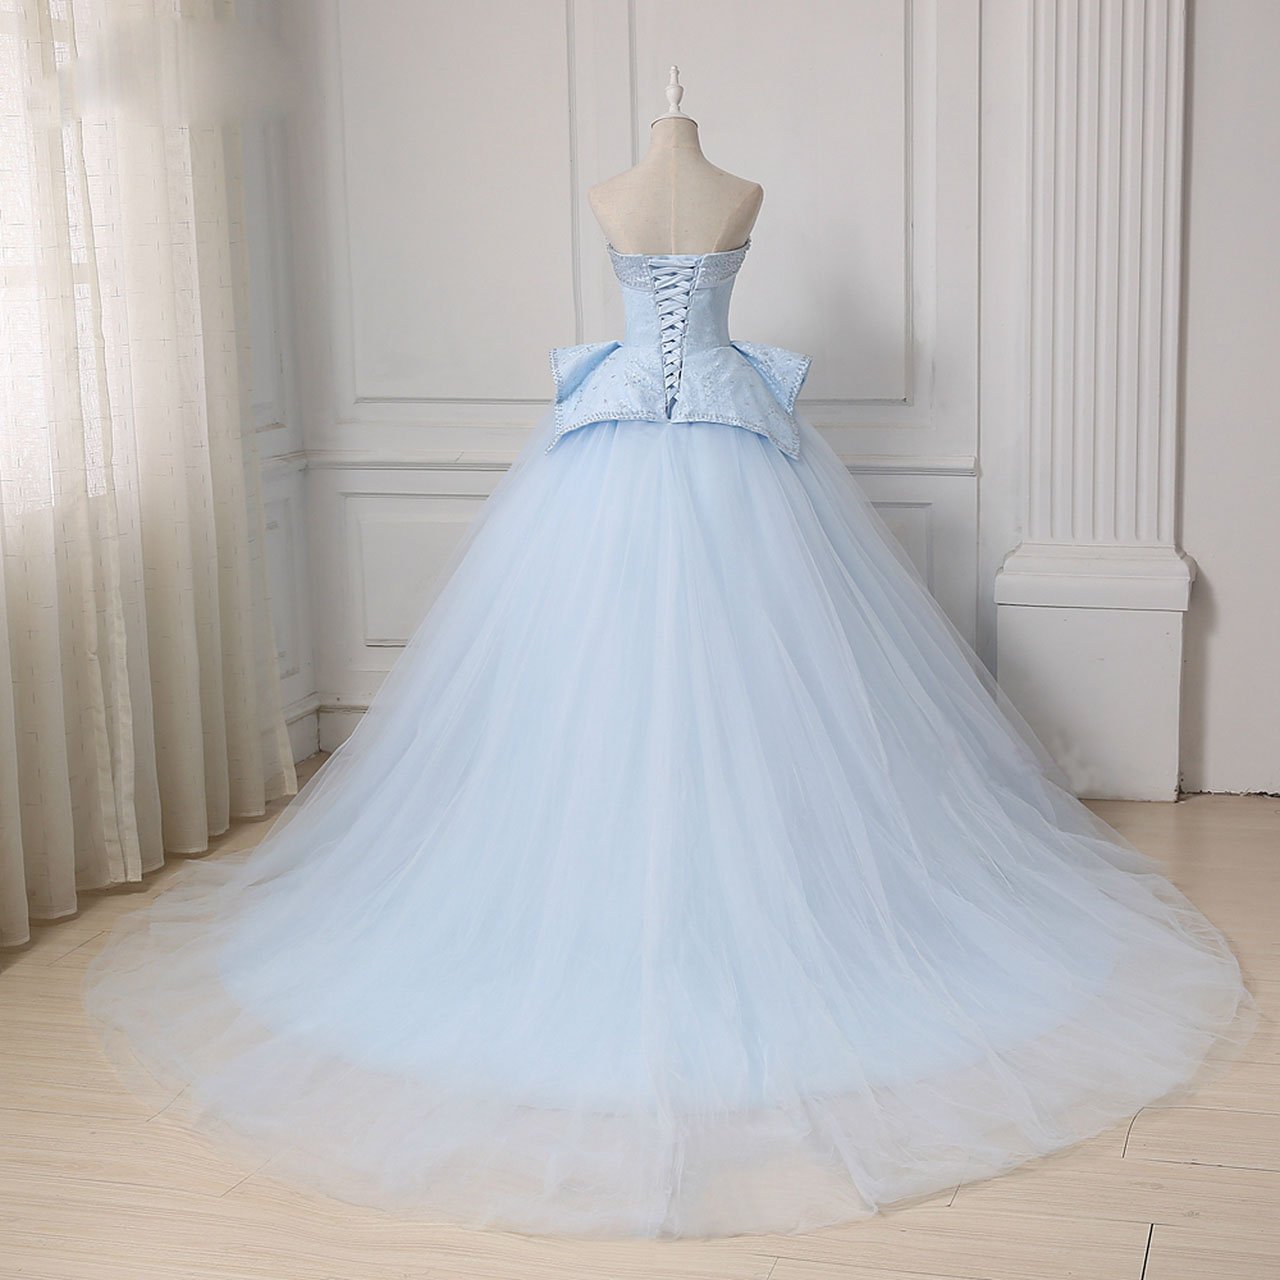 Light Blue Sweetheart Ball Gown Beading Tulle Prom Dress, Sweep Train Quinceanera Dress N2540